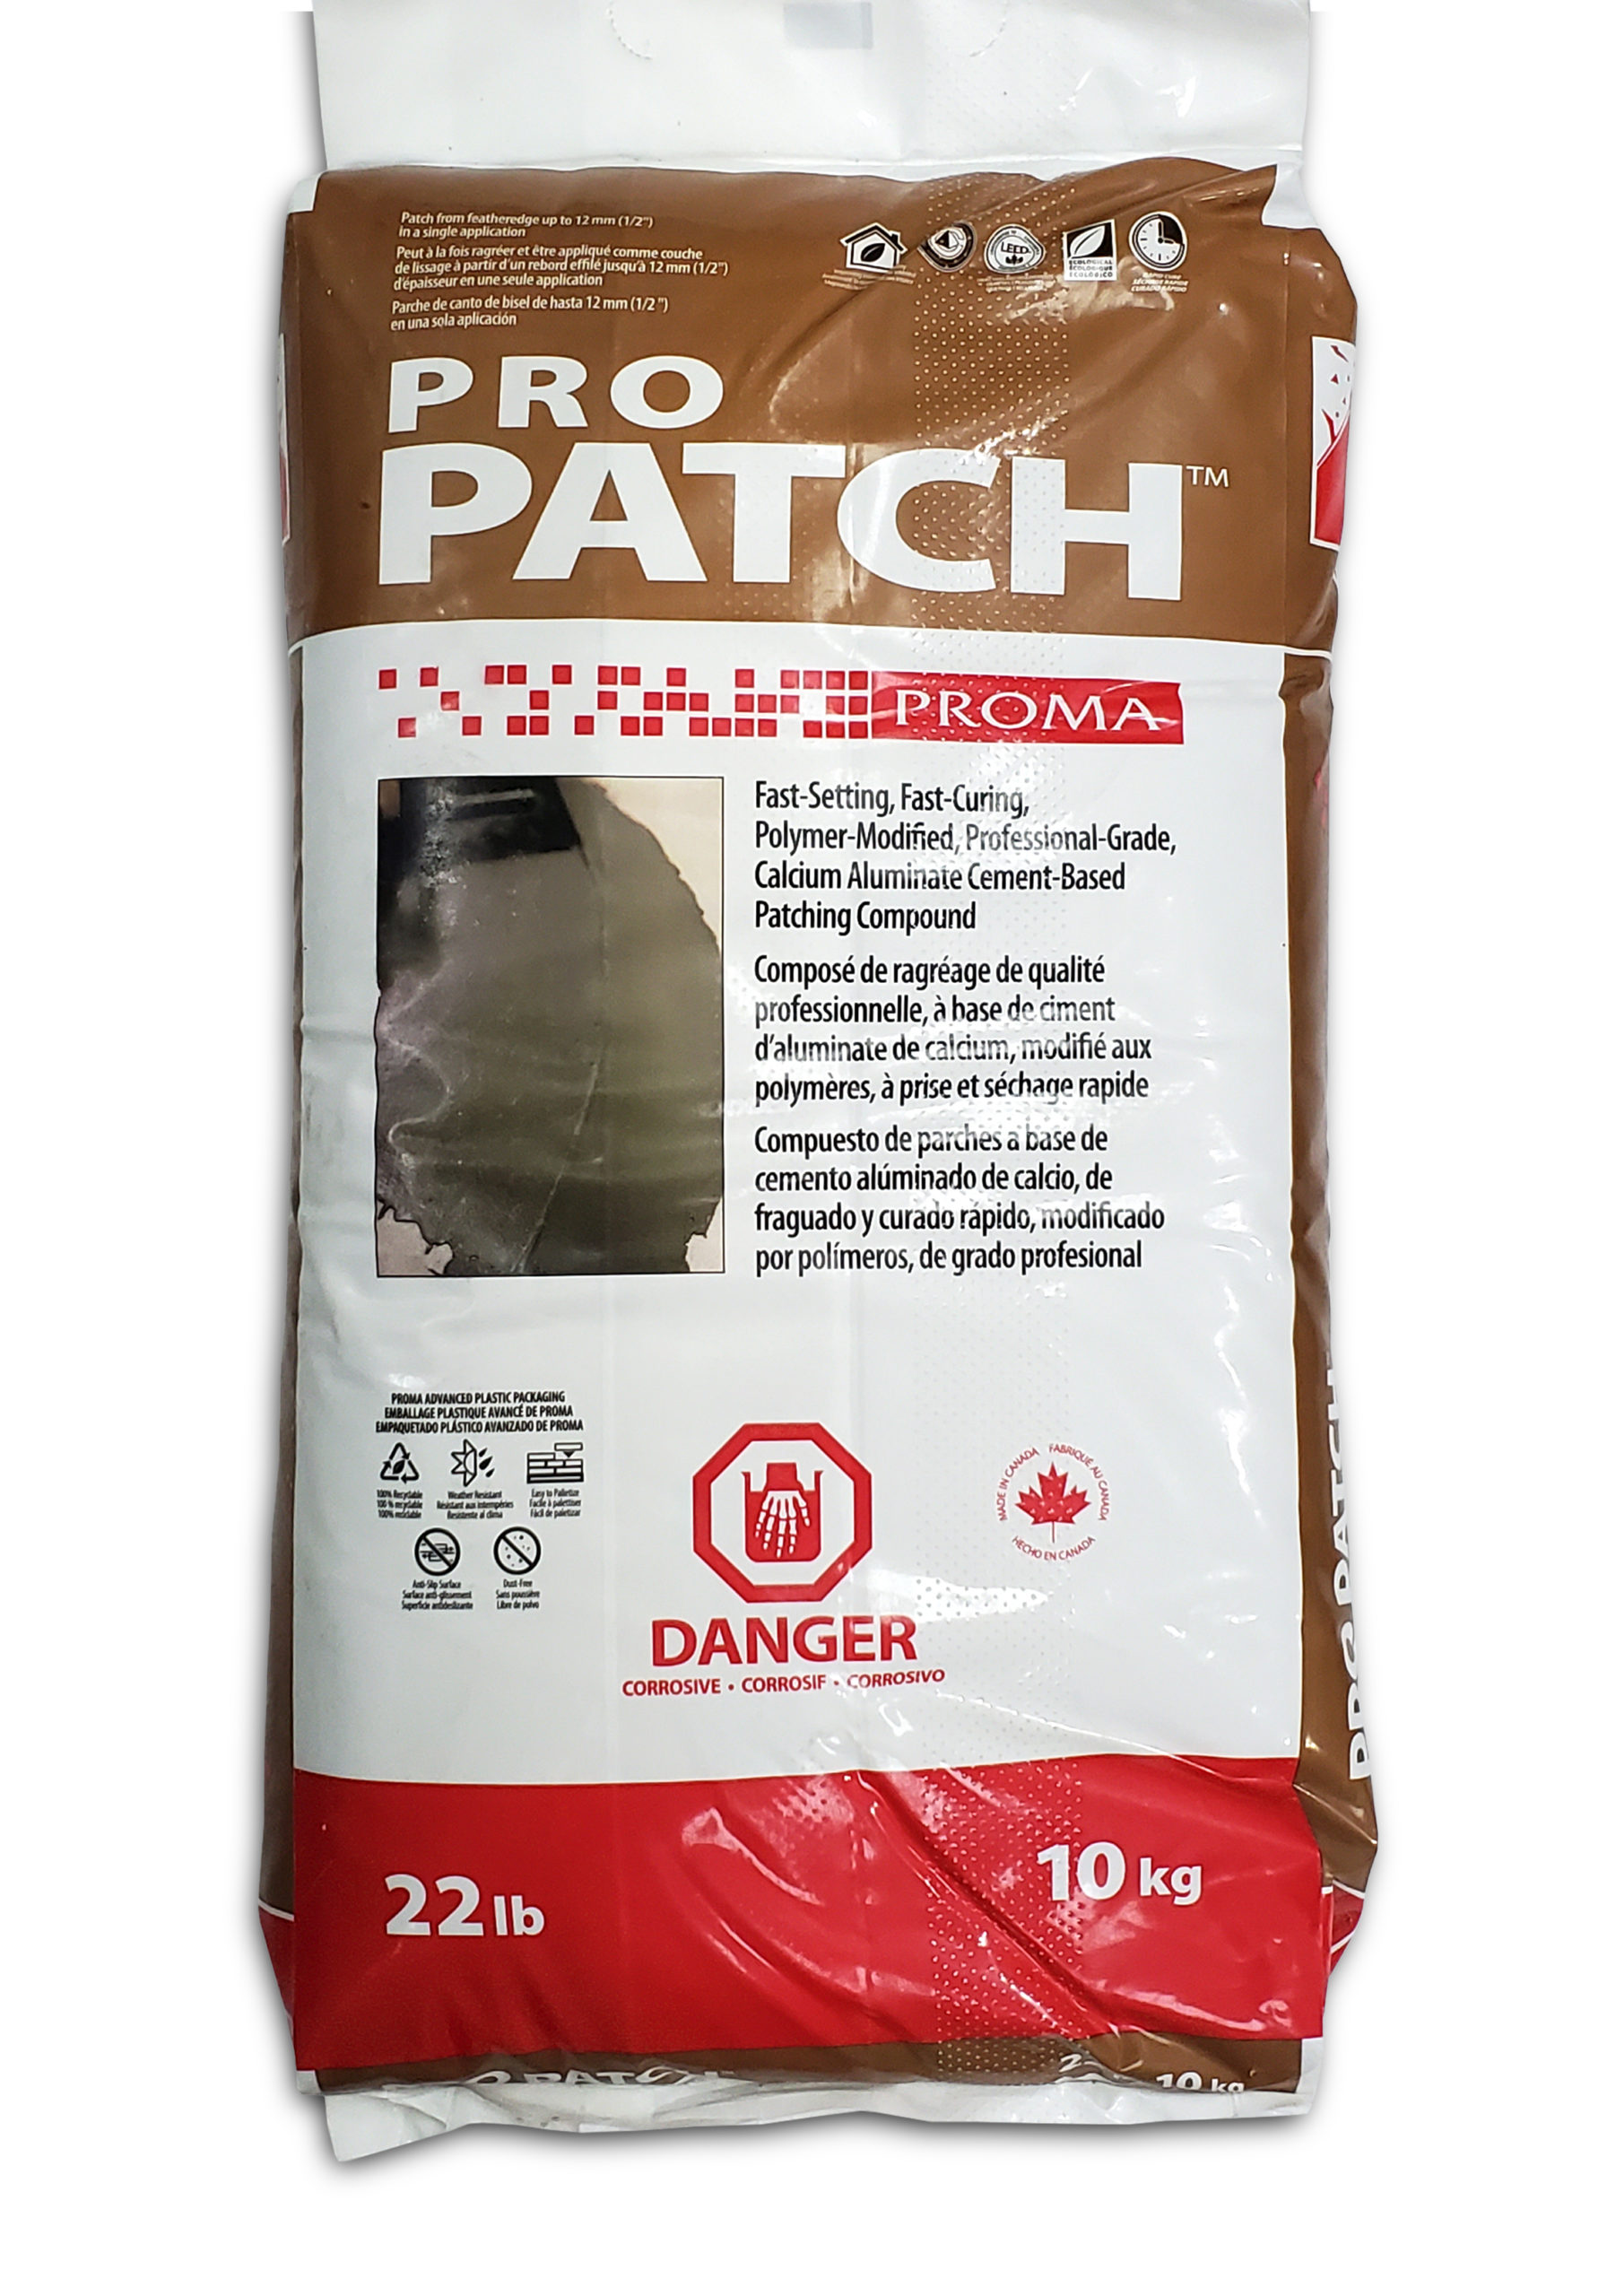 Pro Patch Fast-setting Patching Compound_10kg_22lb